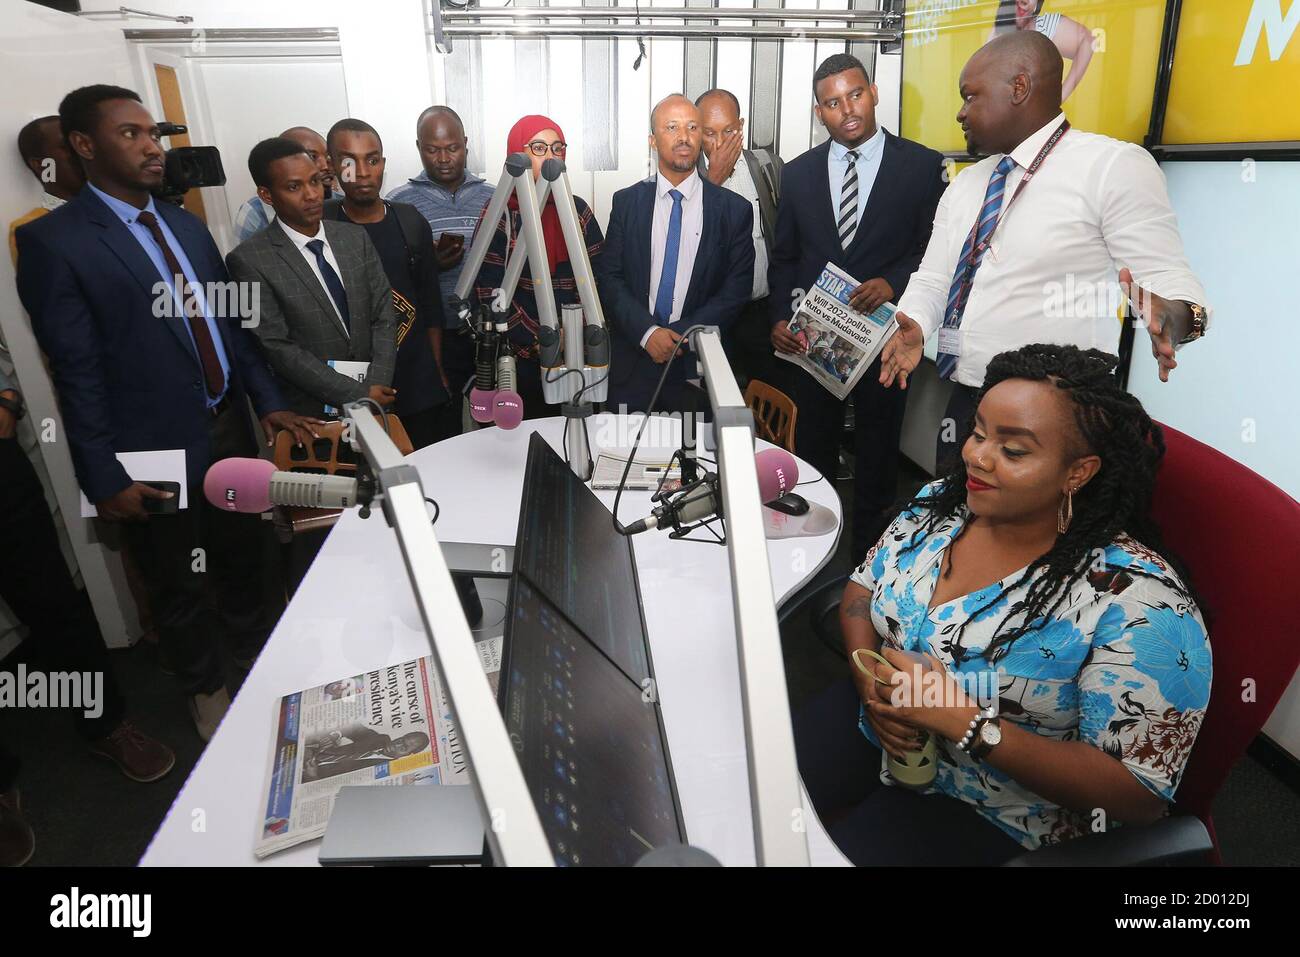 Directors and senior officials of Somalia's Ministry of Information,  Culture and Tourism on a visit to Kiss FM, owned by Radio Africa Group on  11 March 2020. The officials were in Nairobi,